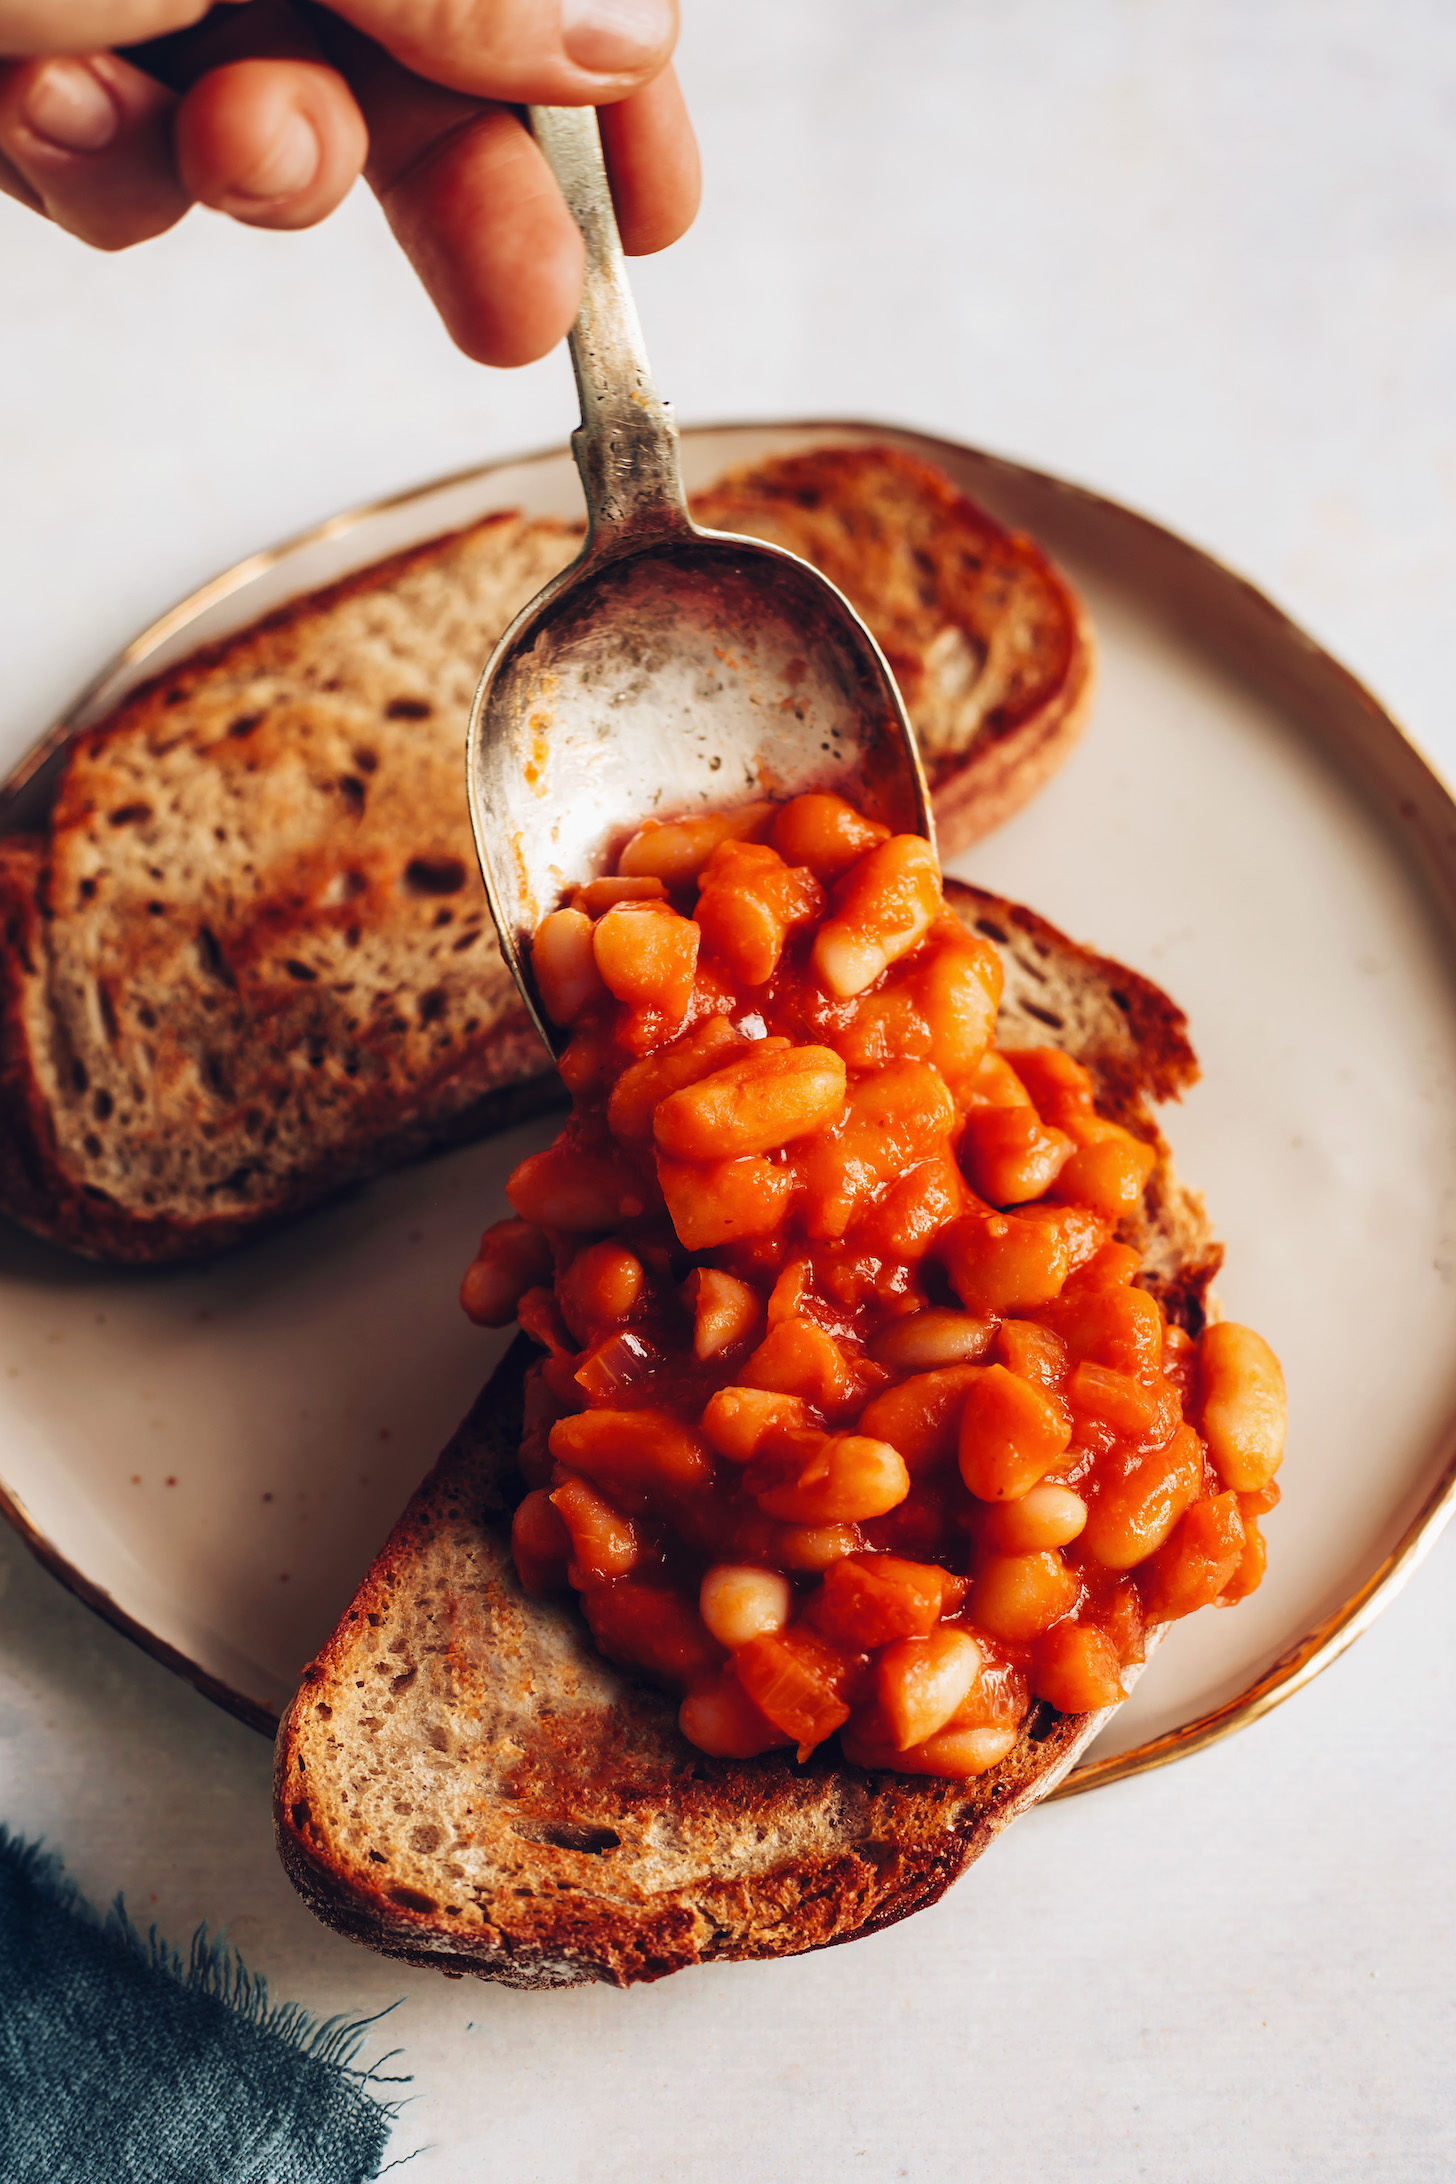 Using a vintage spoon to spread baked beans on toast